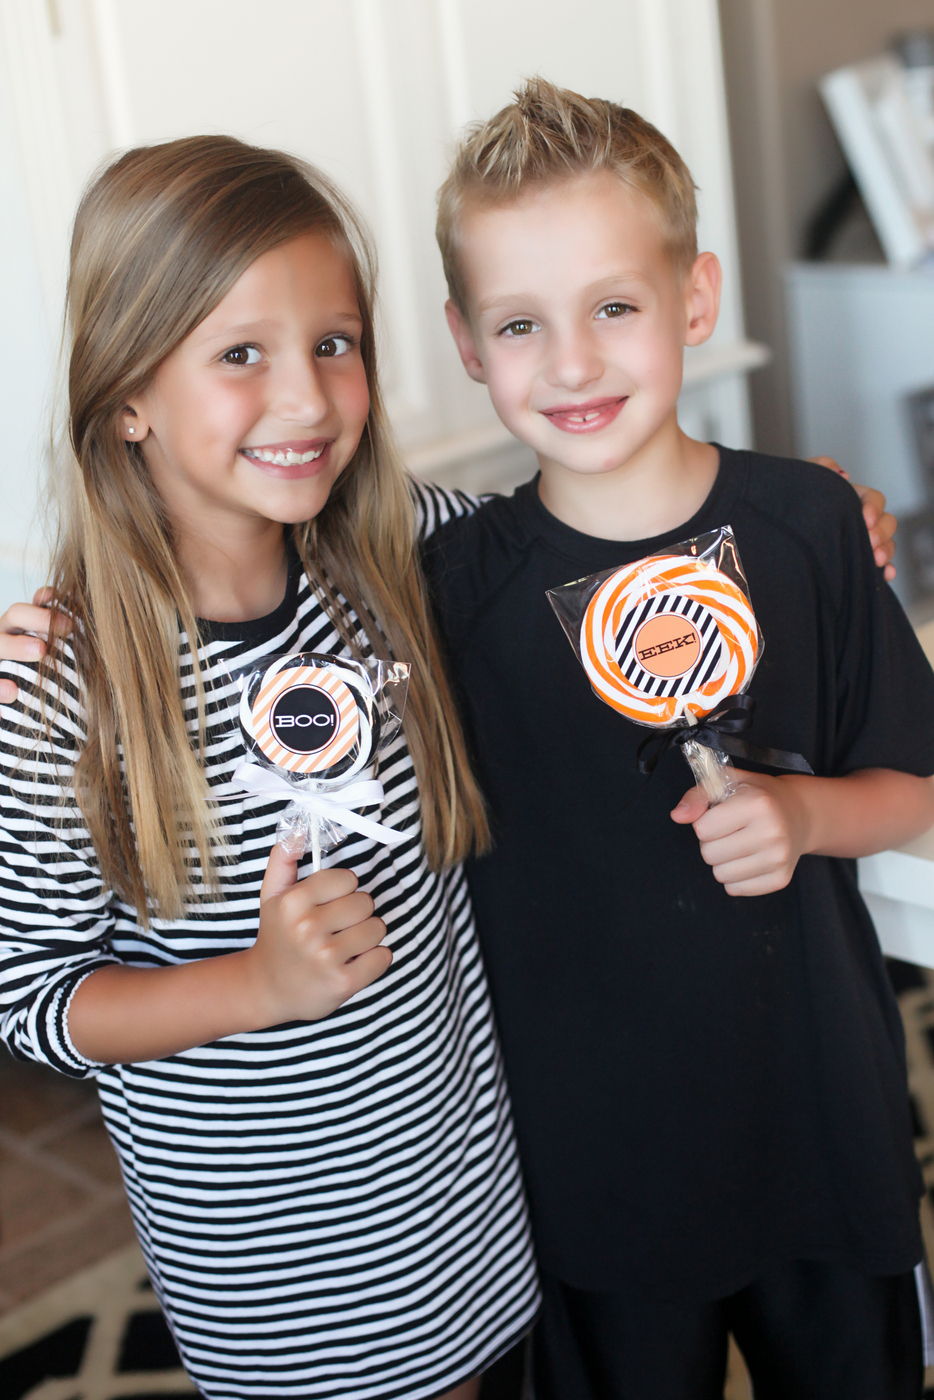 Halloween Party Ideas for Kids | The TomKat Studio